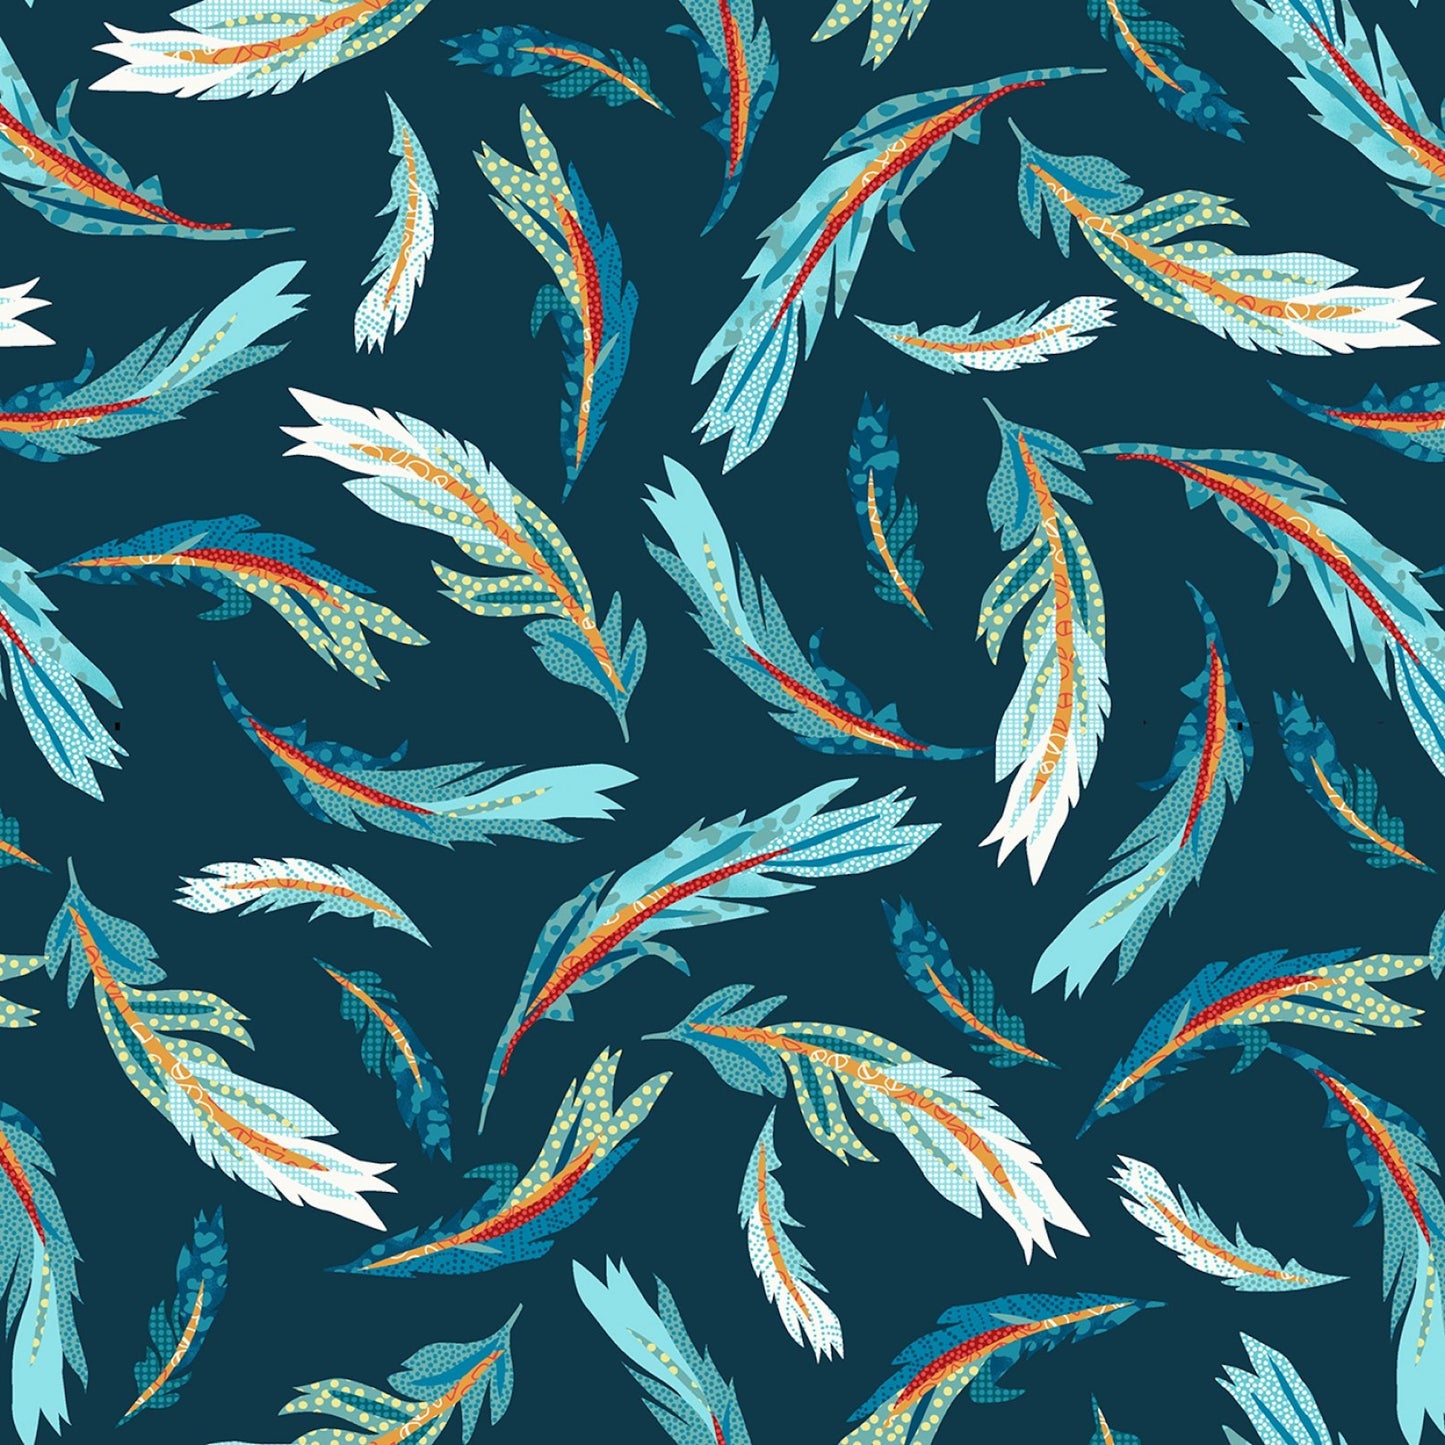 Zooming Chickens- Teal-Red Tossed Feathers